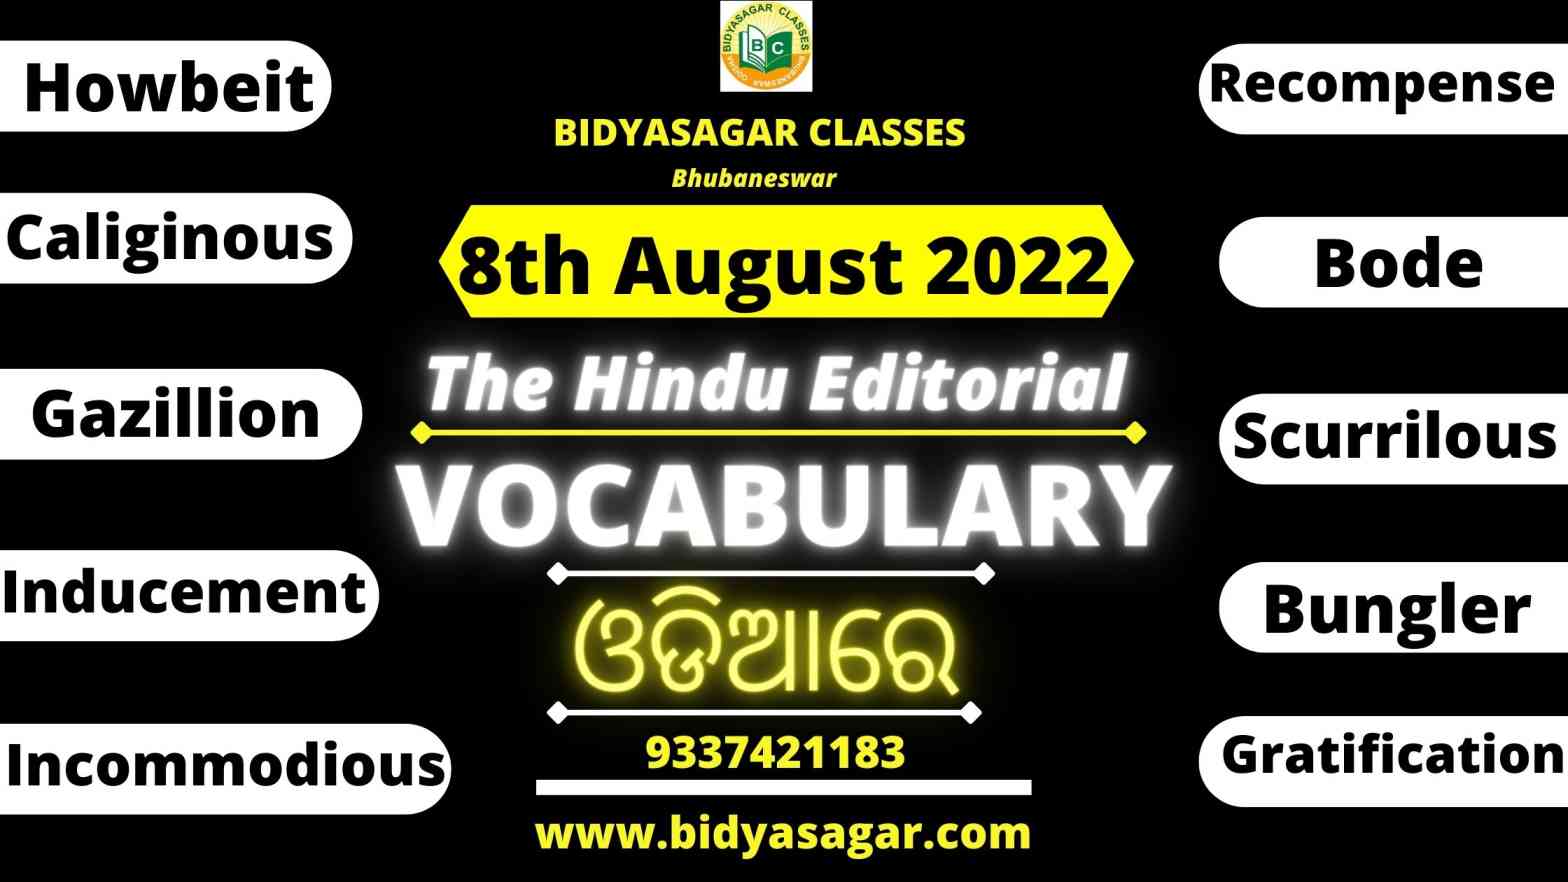 The Hindu Editorial Vocabulary of 9th August 2022